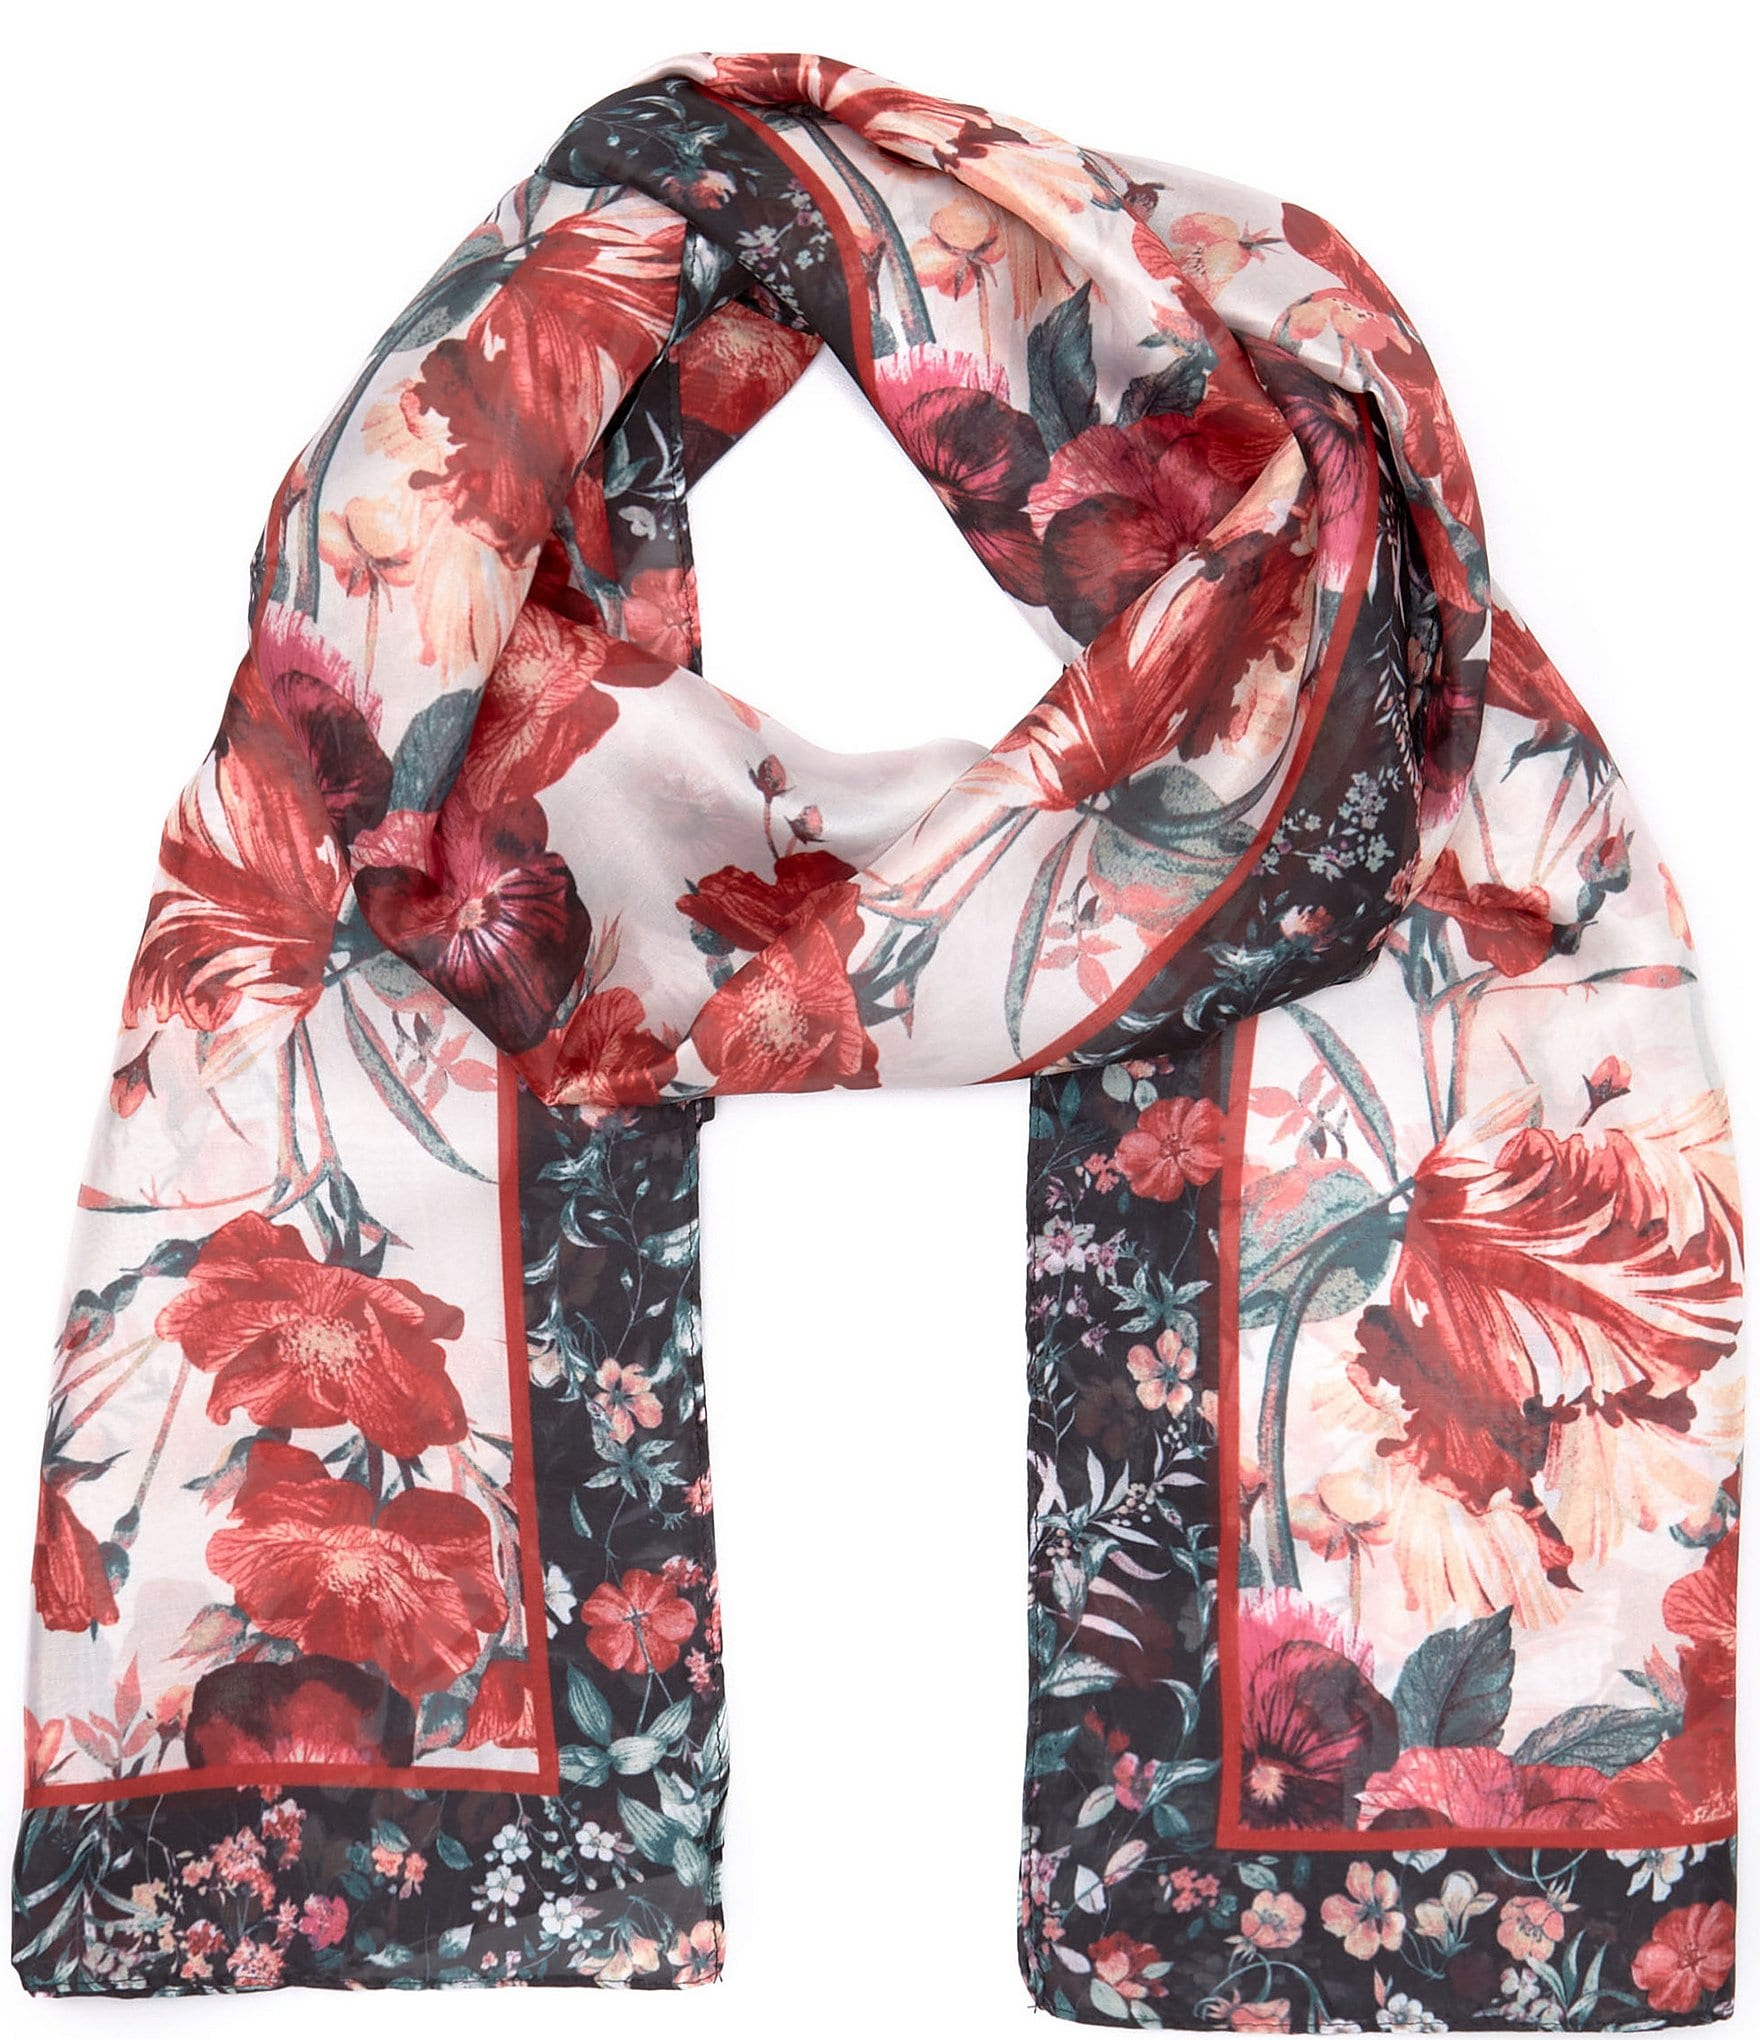 Vince Camuto Statement Floral Oblong Scarf | Dillard's